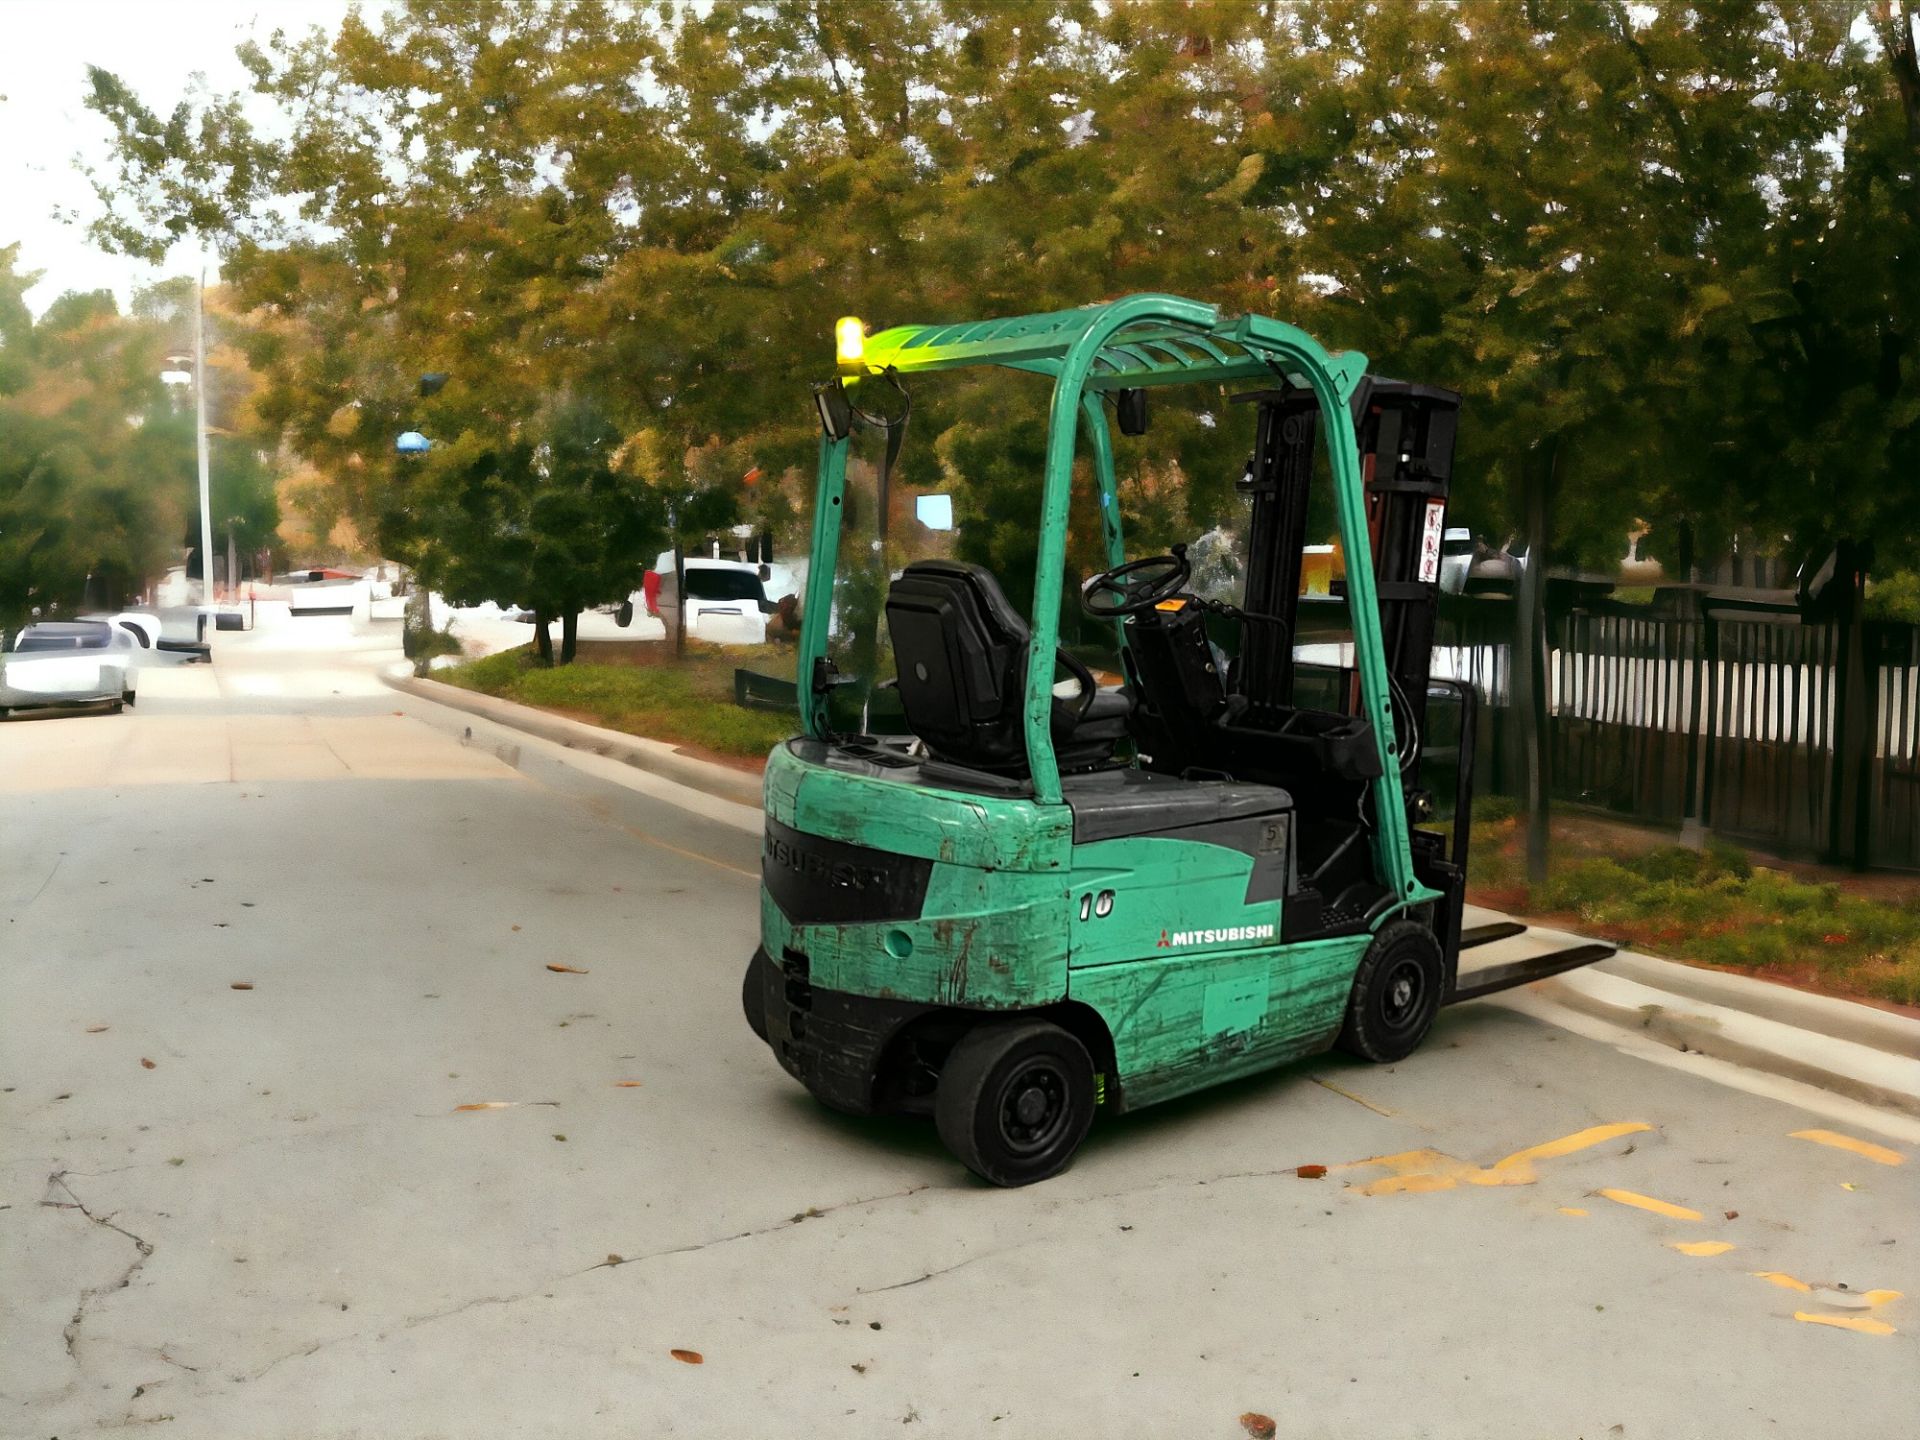 MITSUBISHI ELECTRIC 4-WHEEL FORKLIFT - MODEL FB16N (2005) **(INCLUDES CHARGER)** - Image 6 of 6